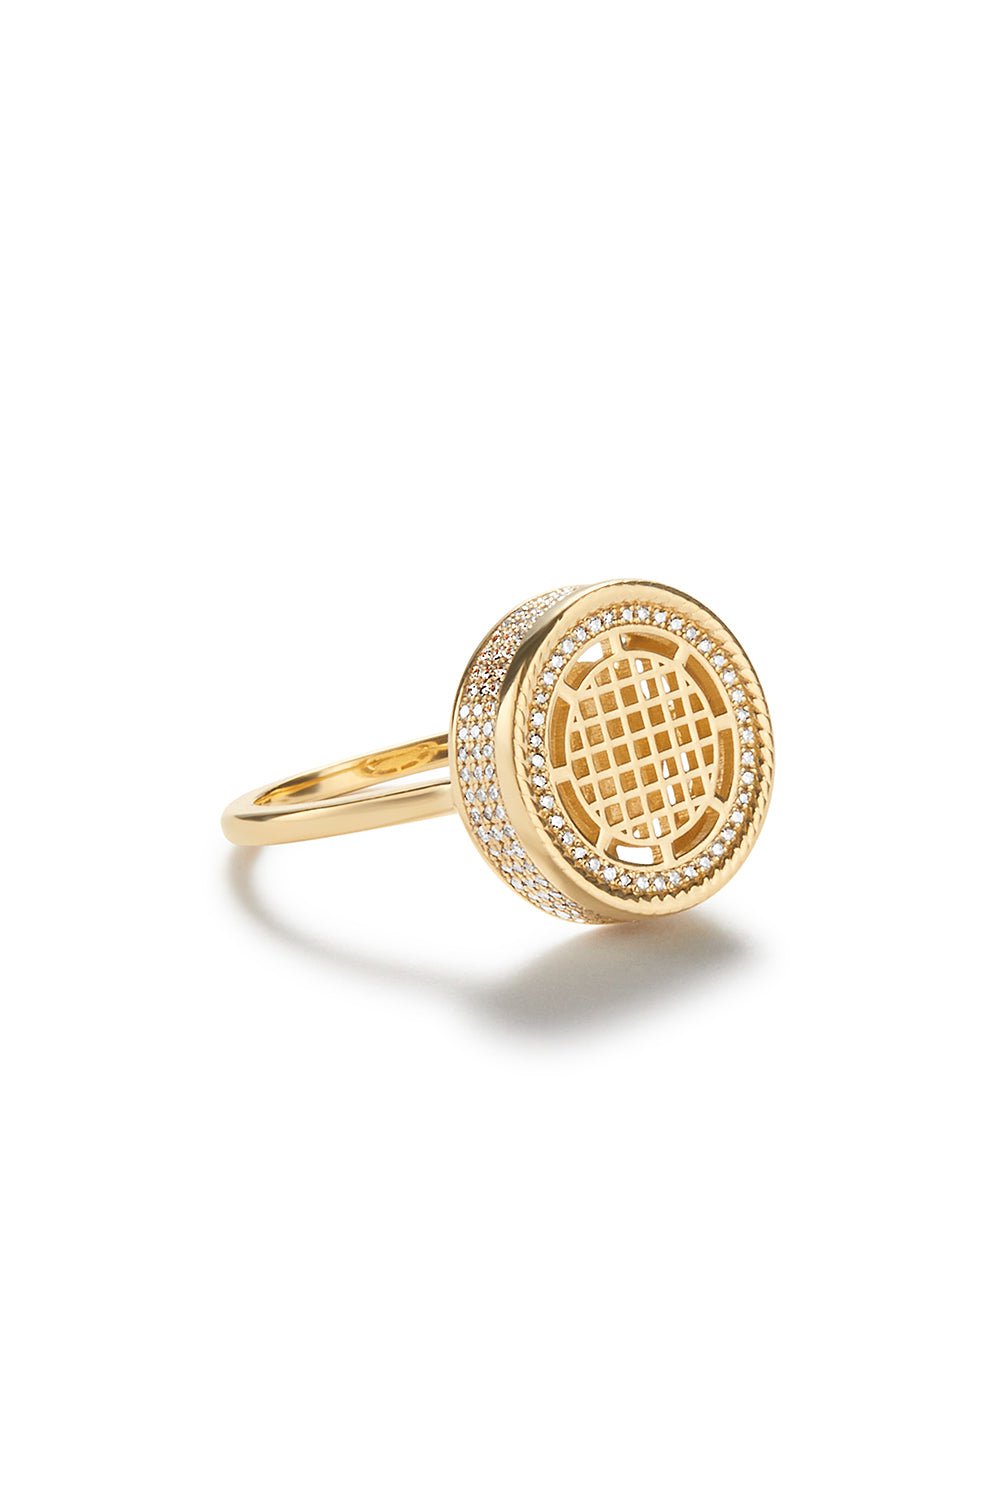 GWEN BELOTI COLLECTION-WOVEN OPEN PAVE DIAMOND RING-